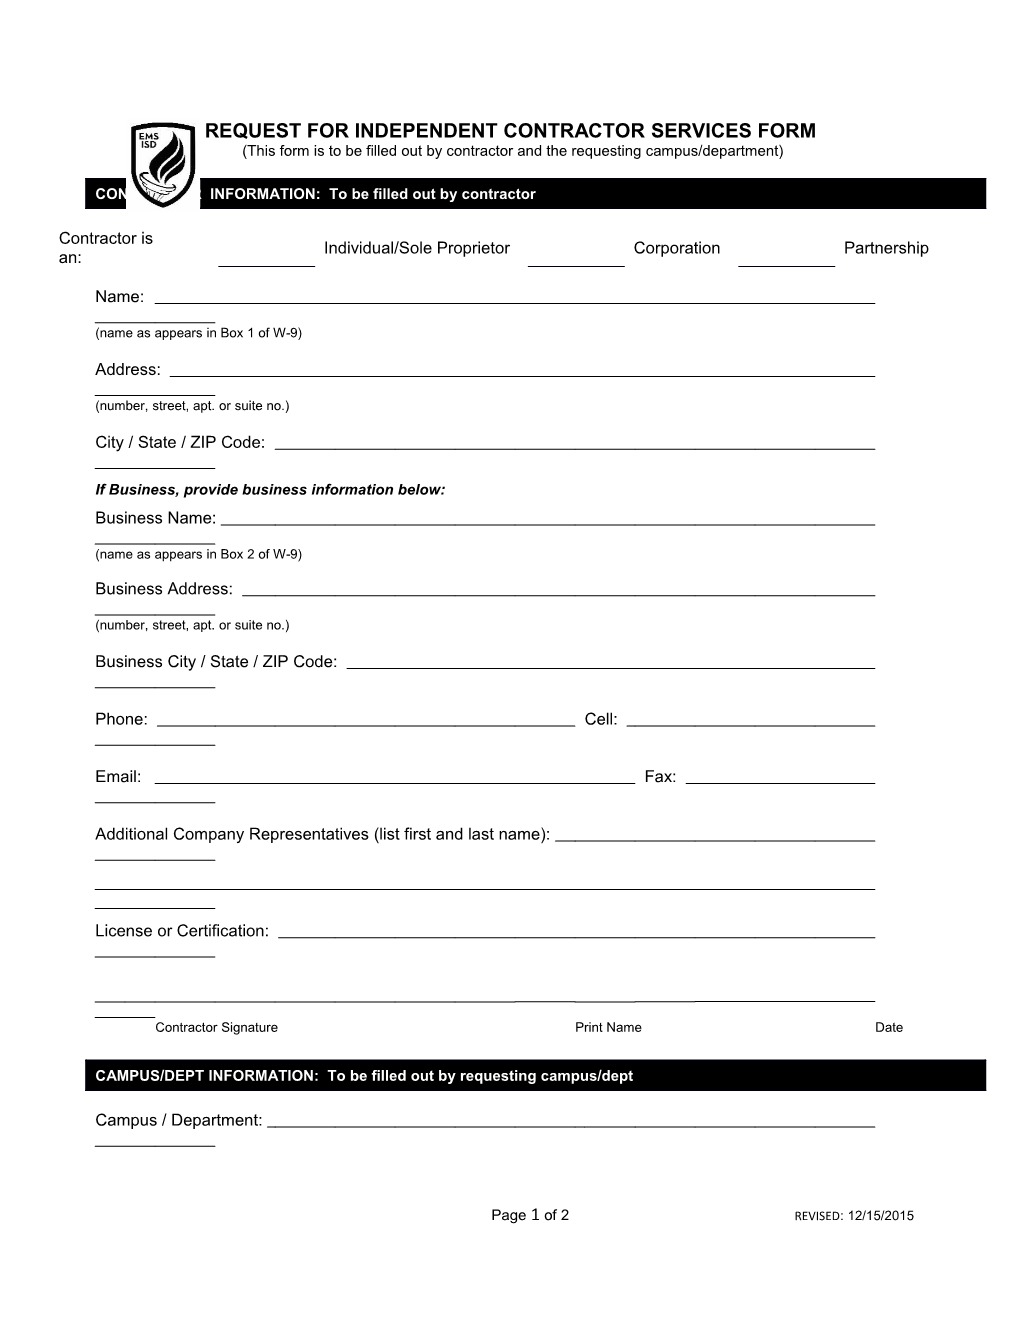 This Form Is to Be Filled out by Contractor and the Requesting Campus/Department